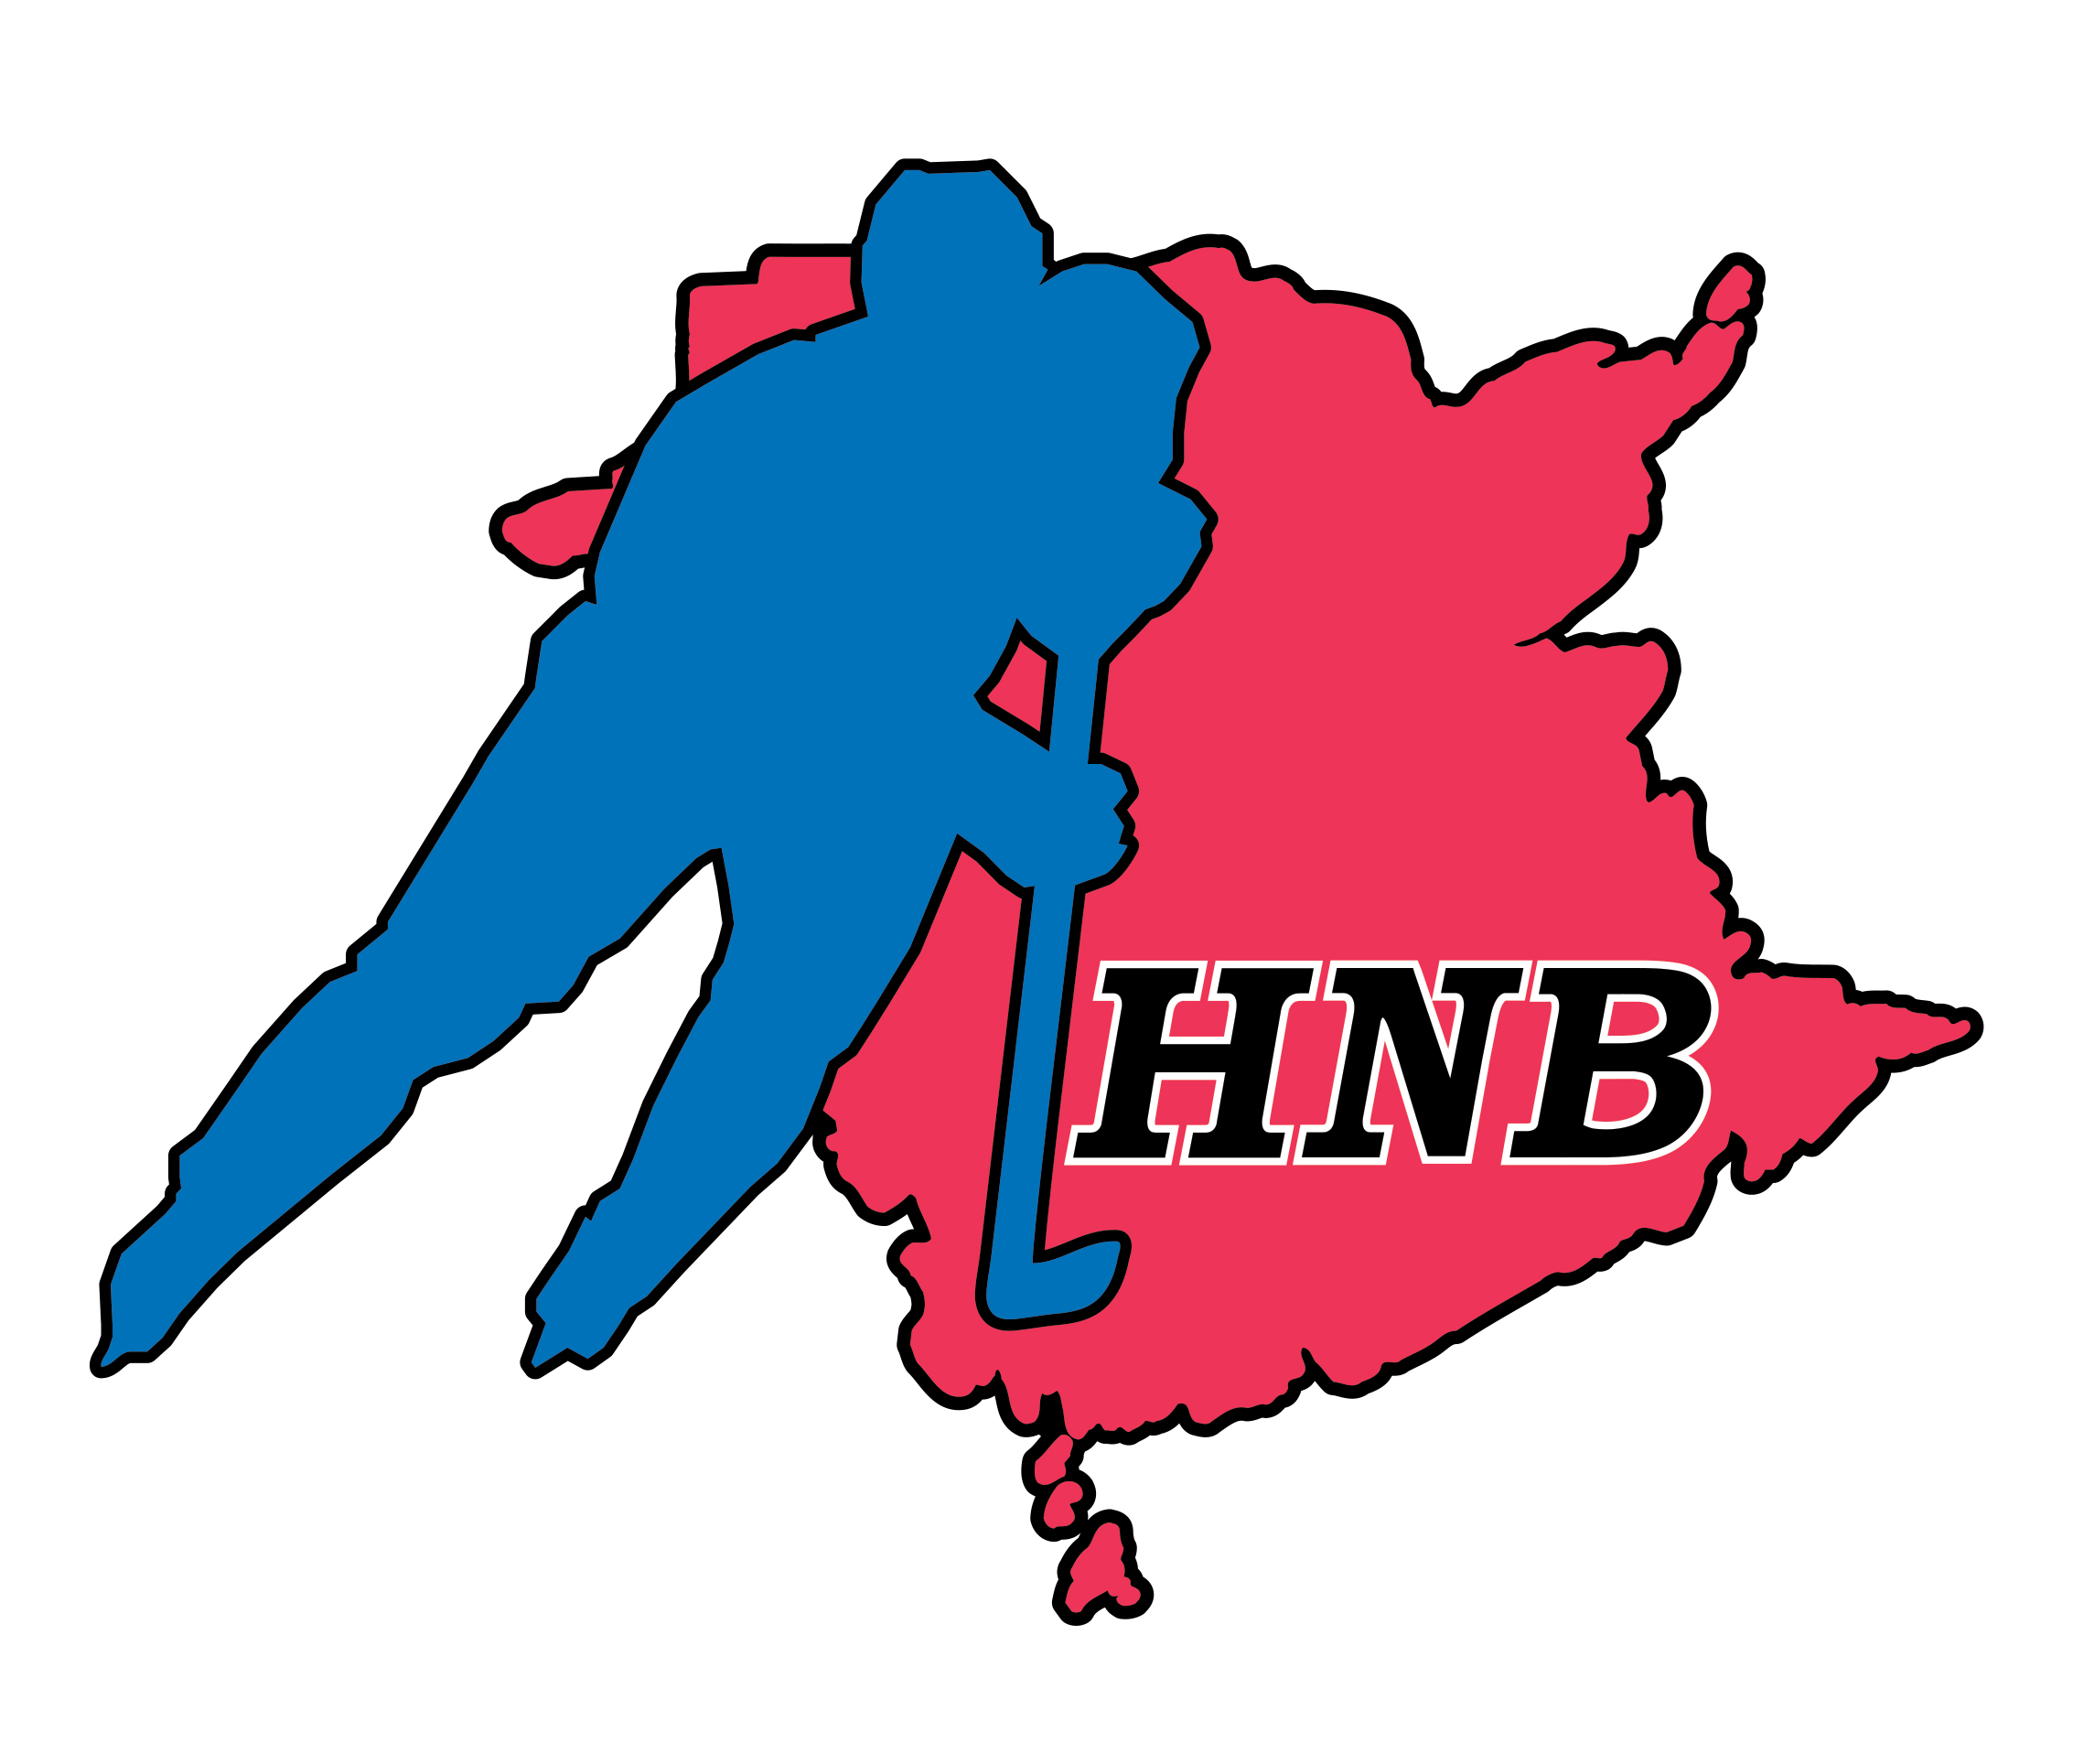 HNB is accepting nominations for the HNB Board of Directors